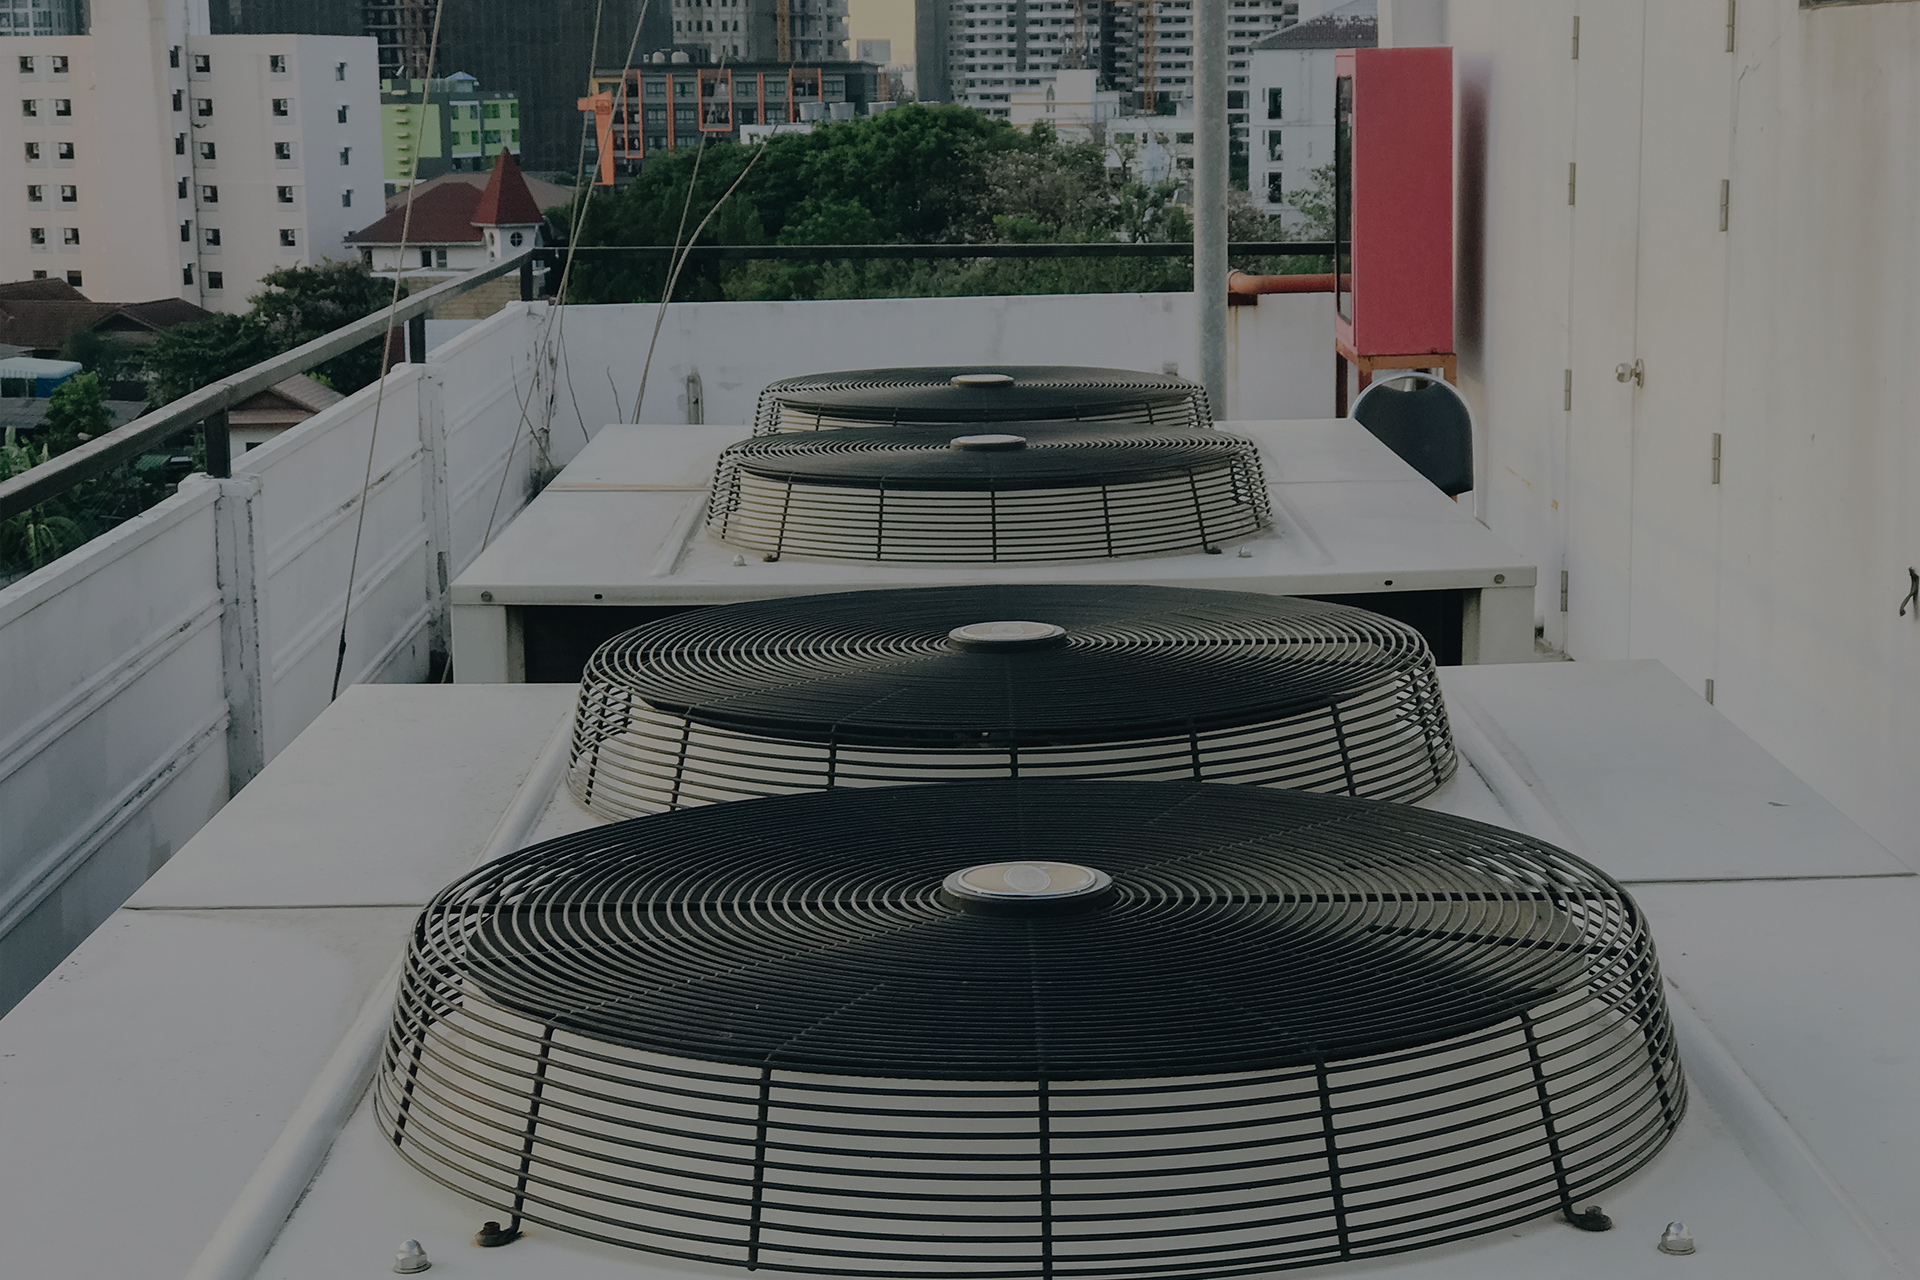 NY Refrigeration & Air Conditioning Inc. | Refrigeration Repair and Air Conditioning Repair| Forest Hills, Queens County and NYC | Phone #: 917.438.8040, Email: NewYorkRefrigeration.AC@gmail.com